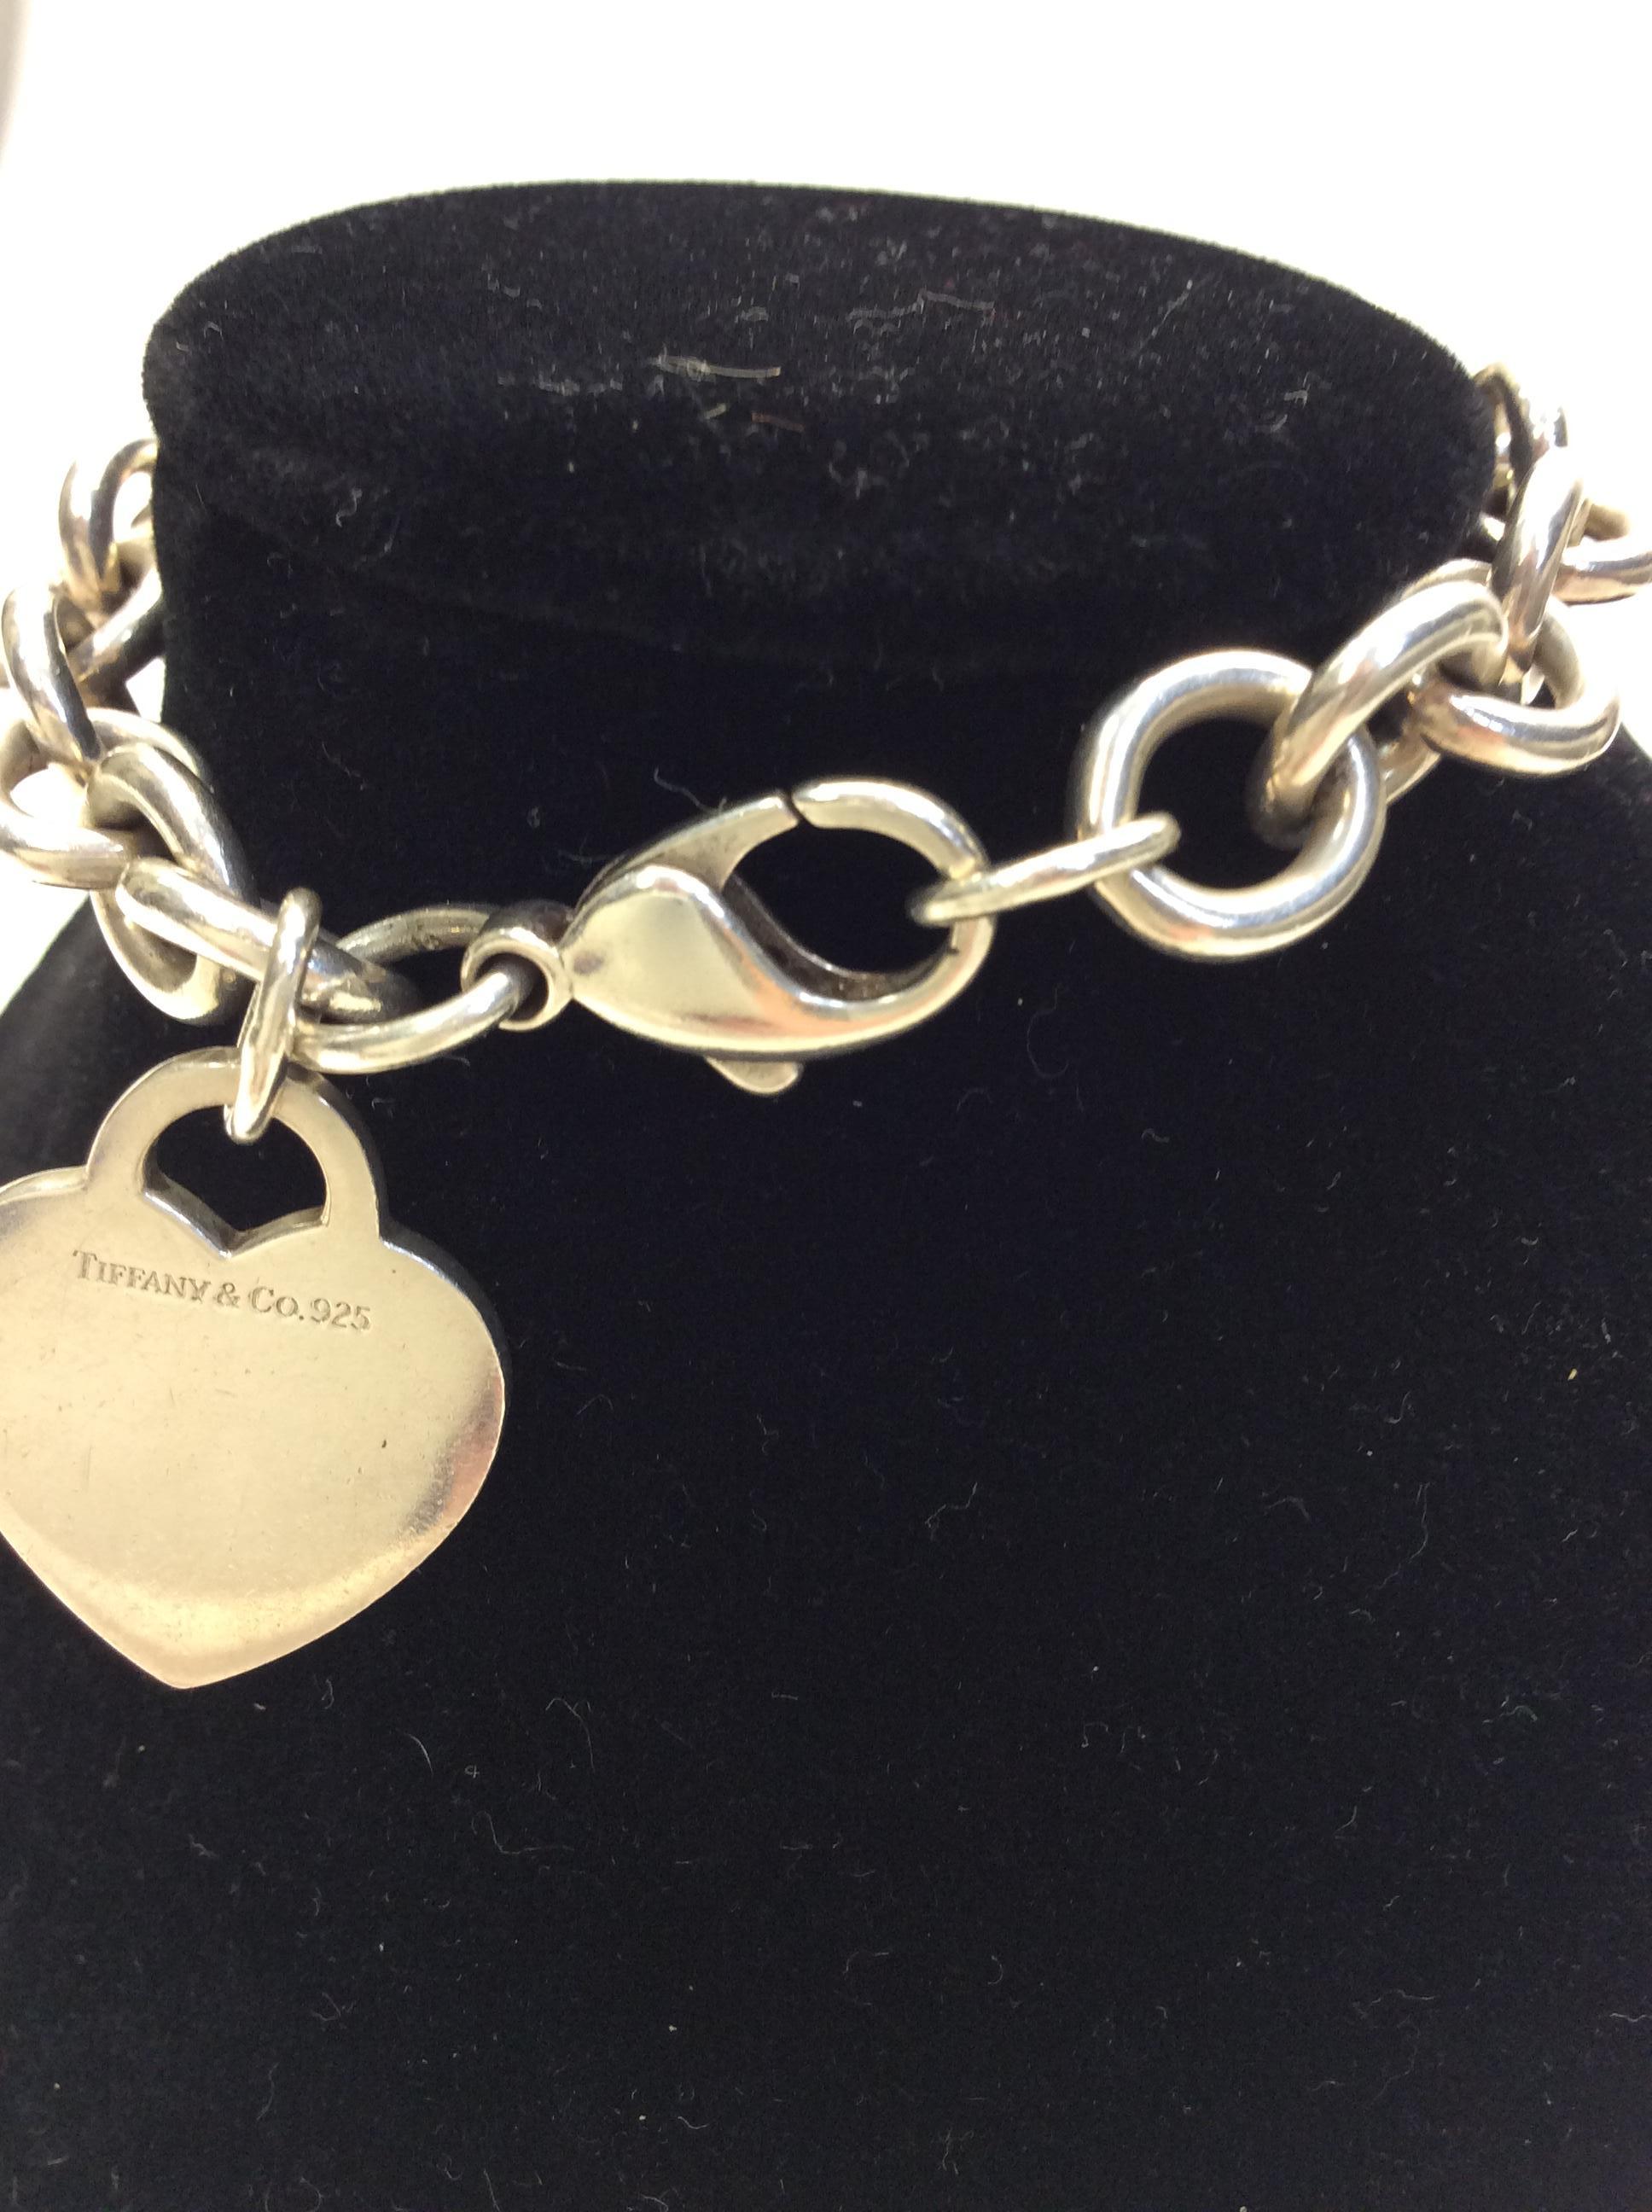 Tiffany & Co. Heart Link Bracelet In Good Condition For Sale In Narberth, PA